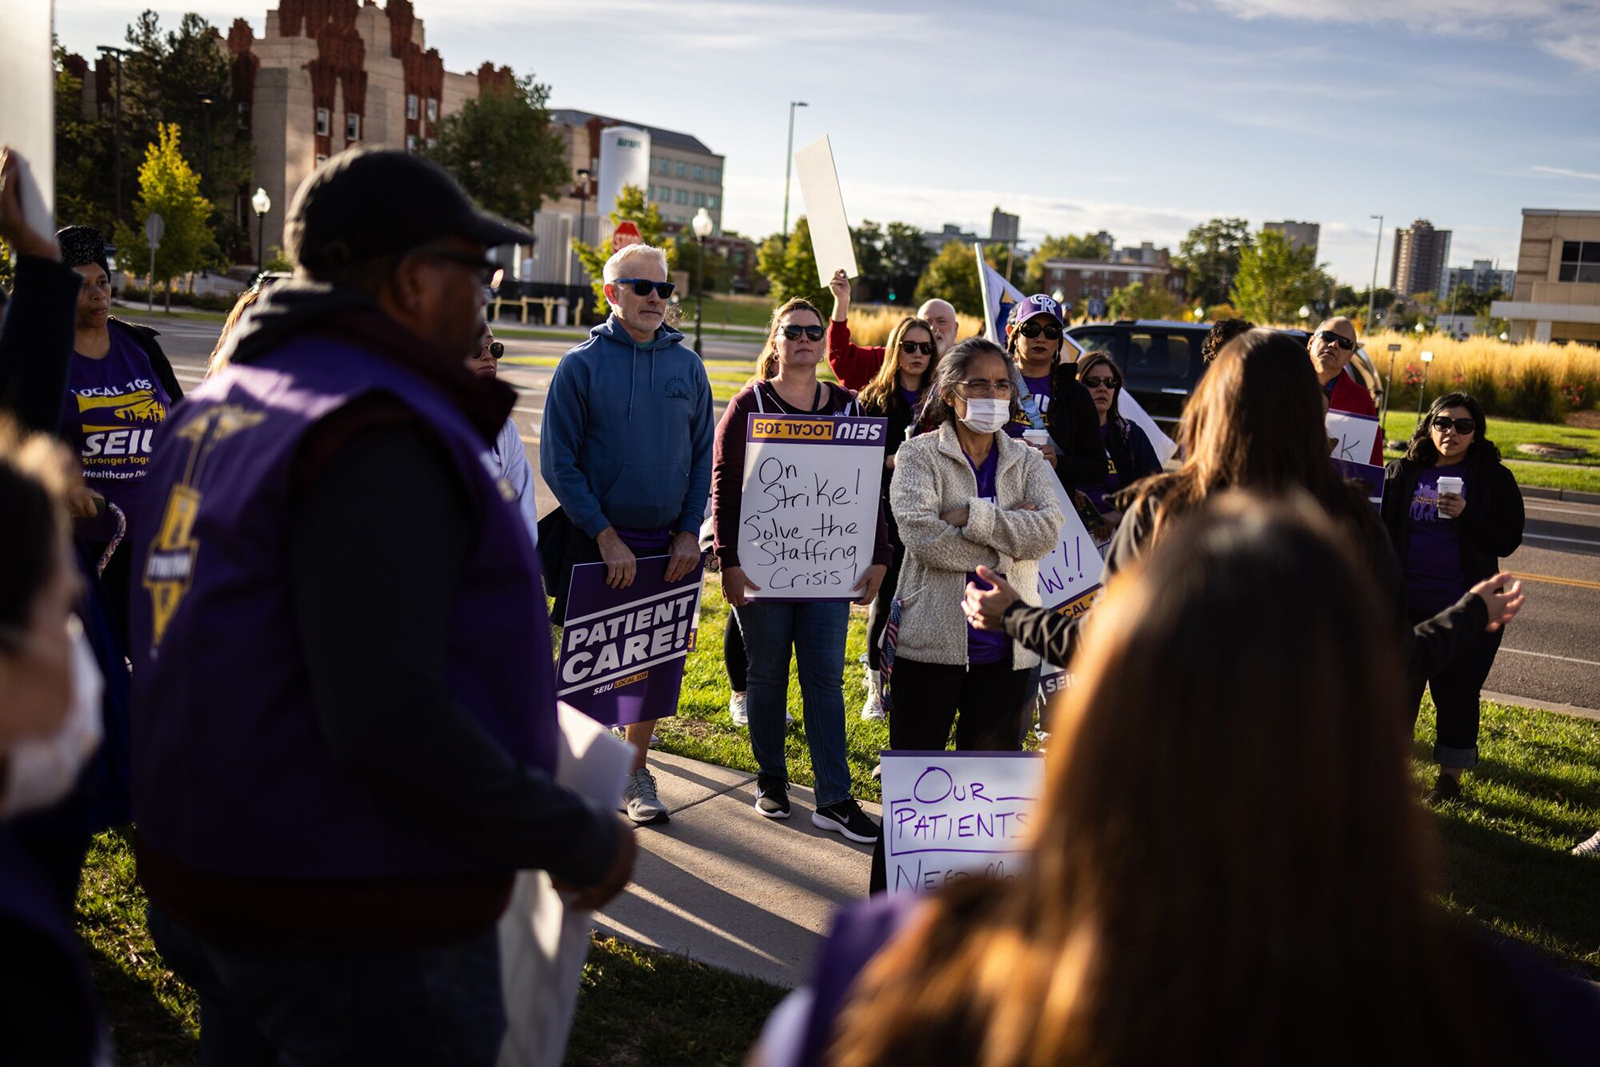 Kaiser Permanente healthcare workers and supporters on a picket line outside Kaiser Permanente medical offices in Denver, Colorado, on Wednesday, Oct. 4.